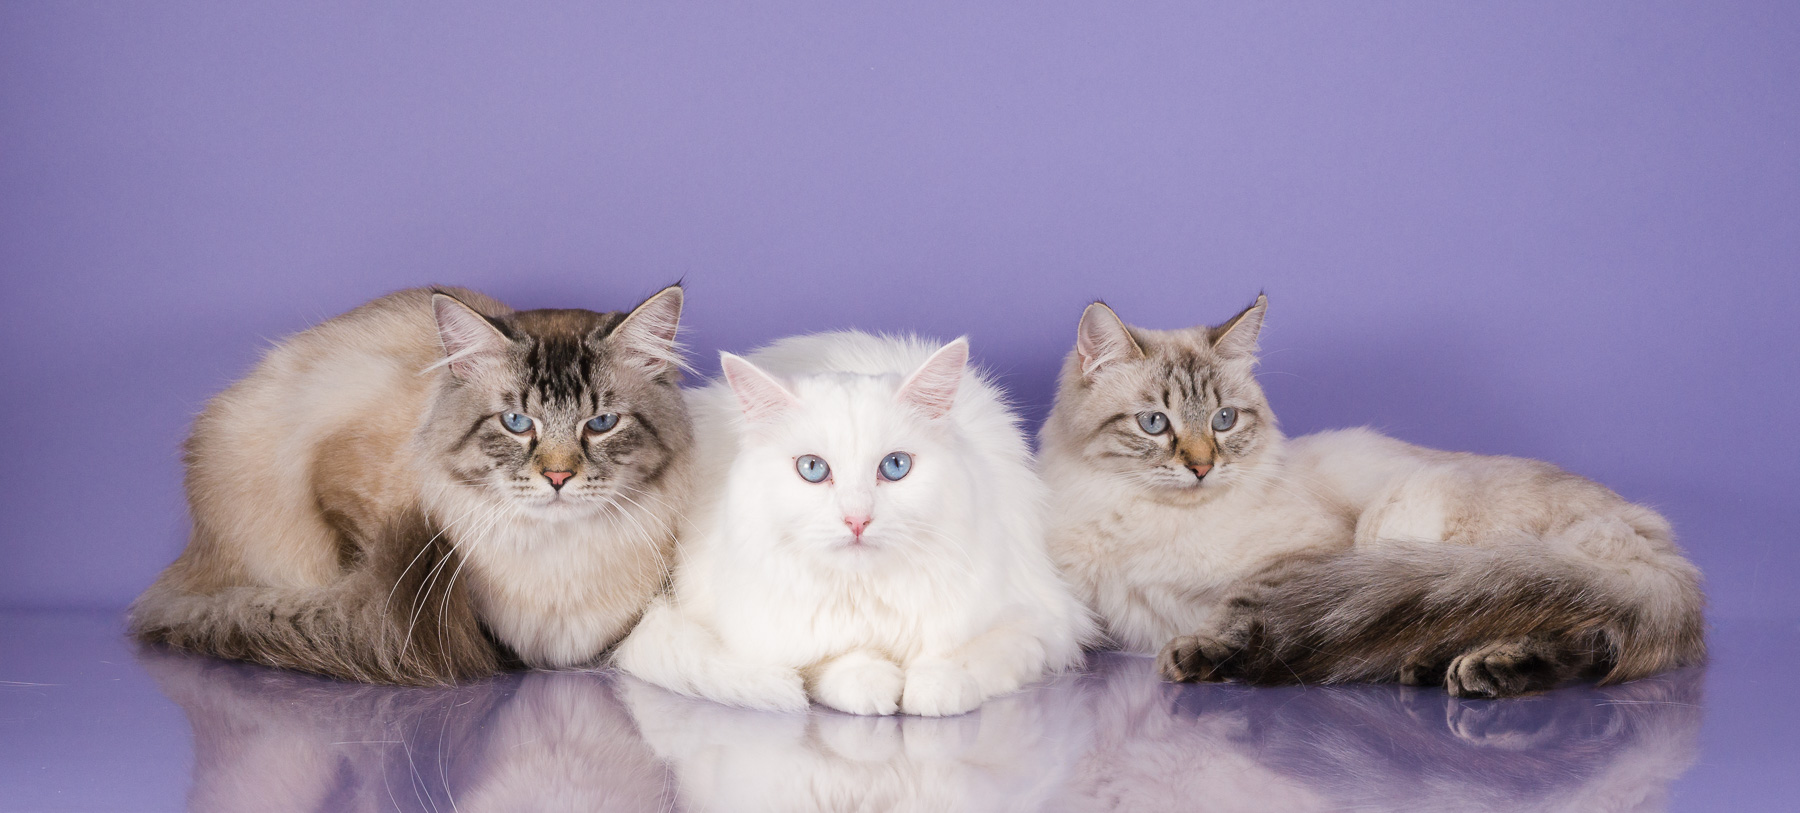 Our Siberians - Siberian Cats